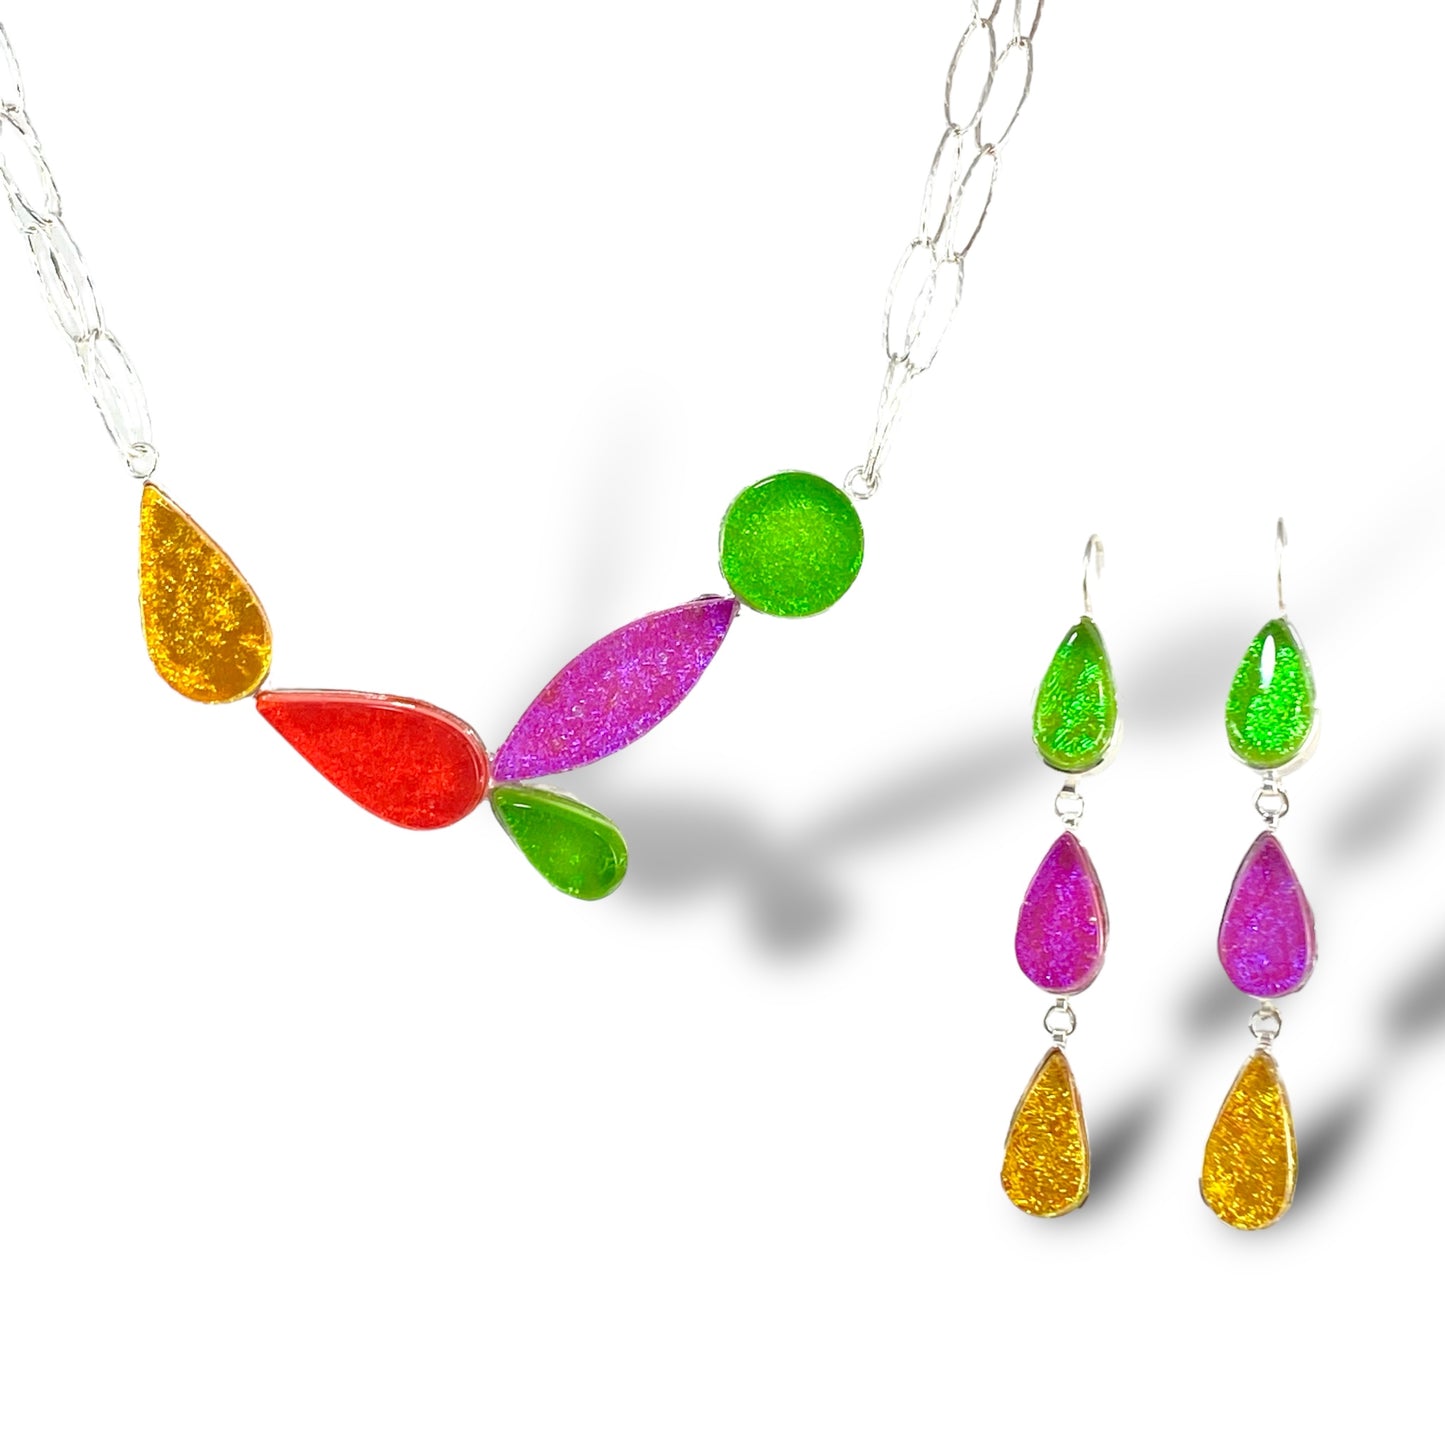 Five Element MCM Necklace in Sunflower, Sangria, Candy & Citron